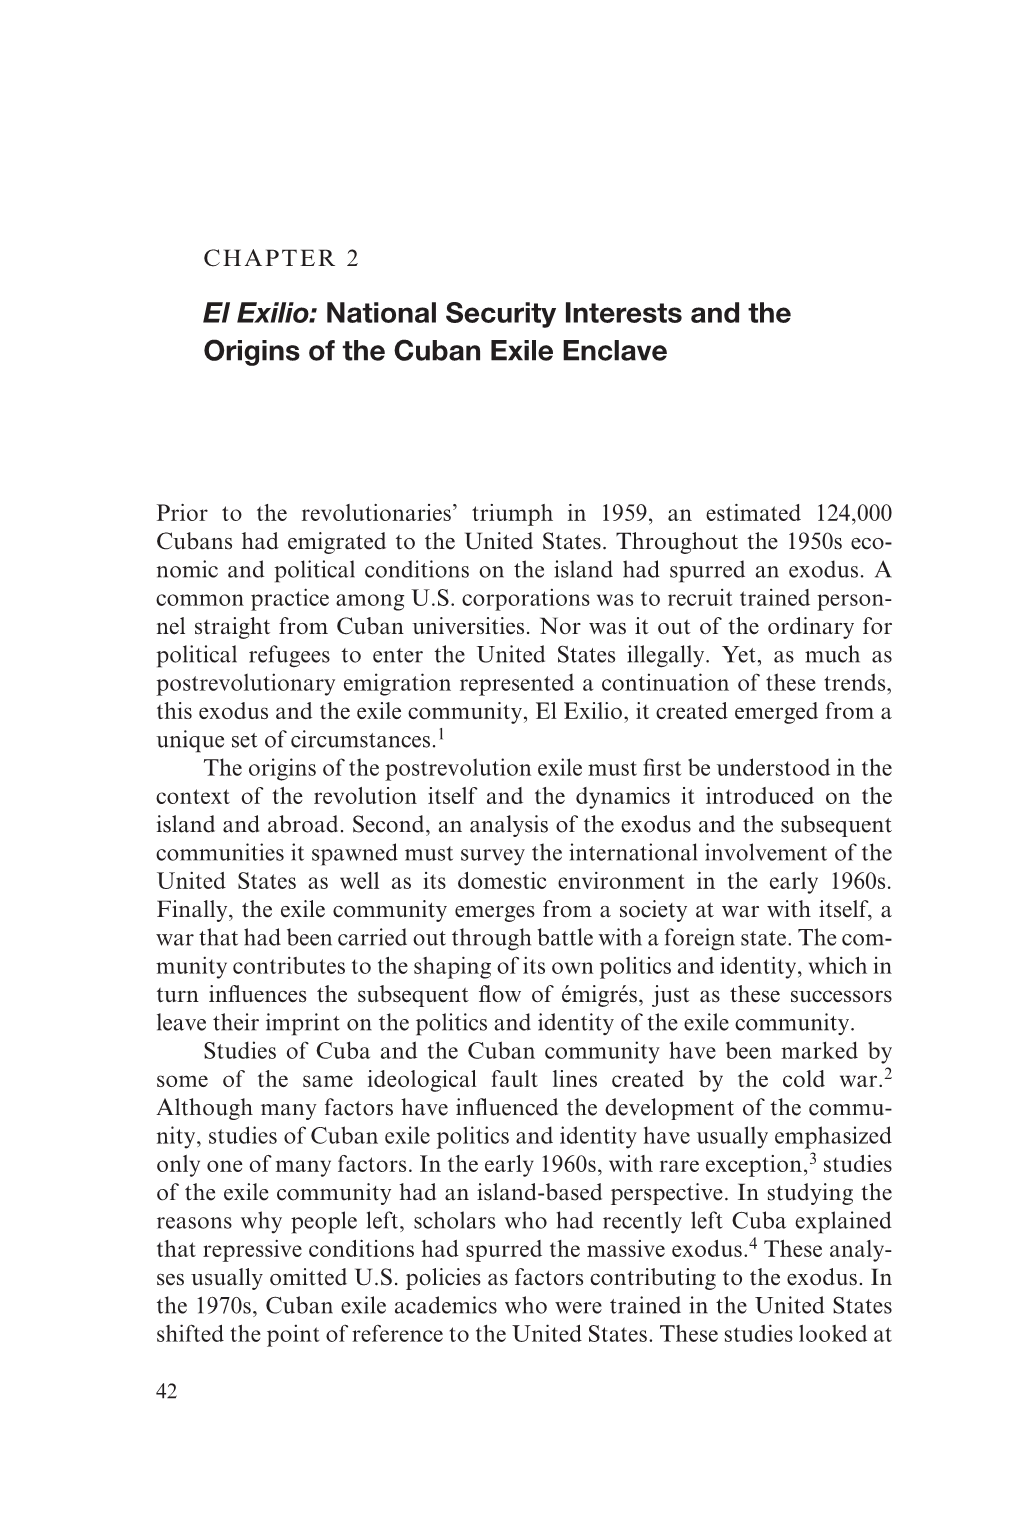 El Exilio: National Security Interests and the Origins of the Cuban Exile Enclave